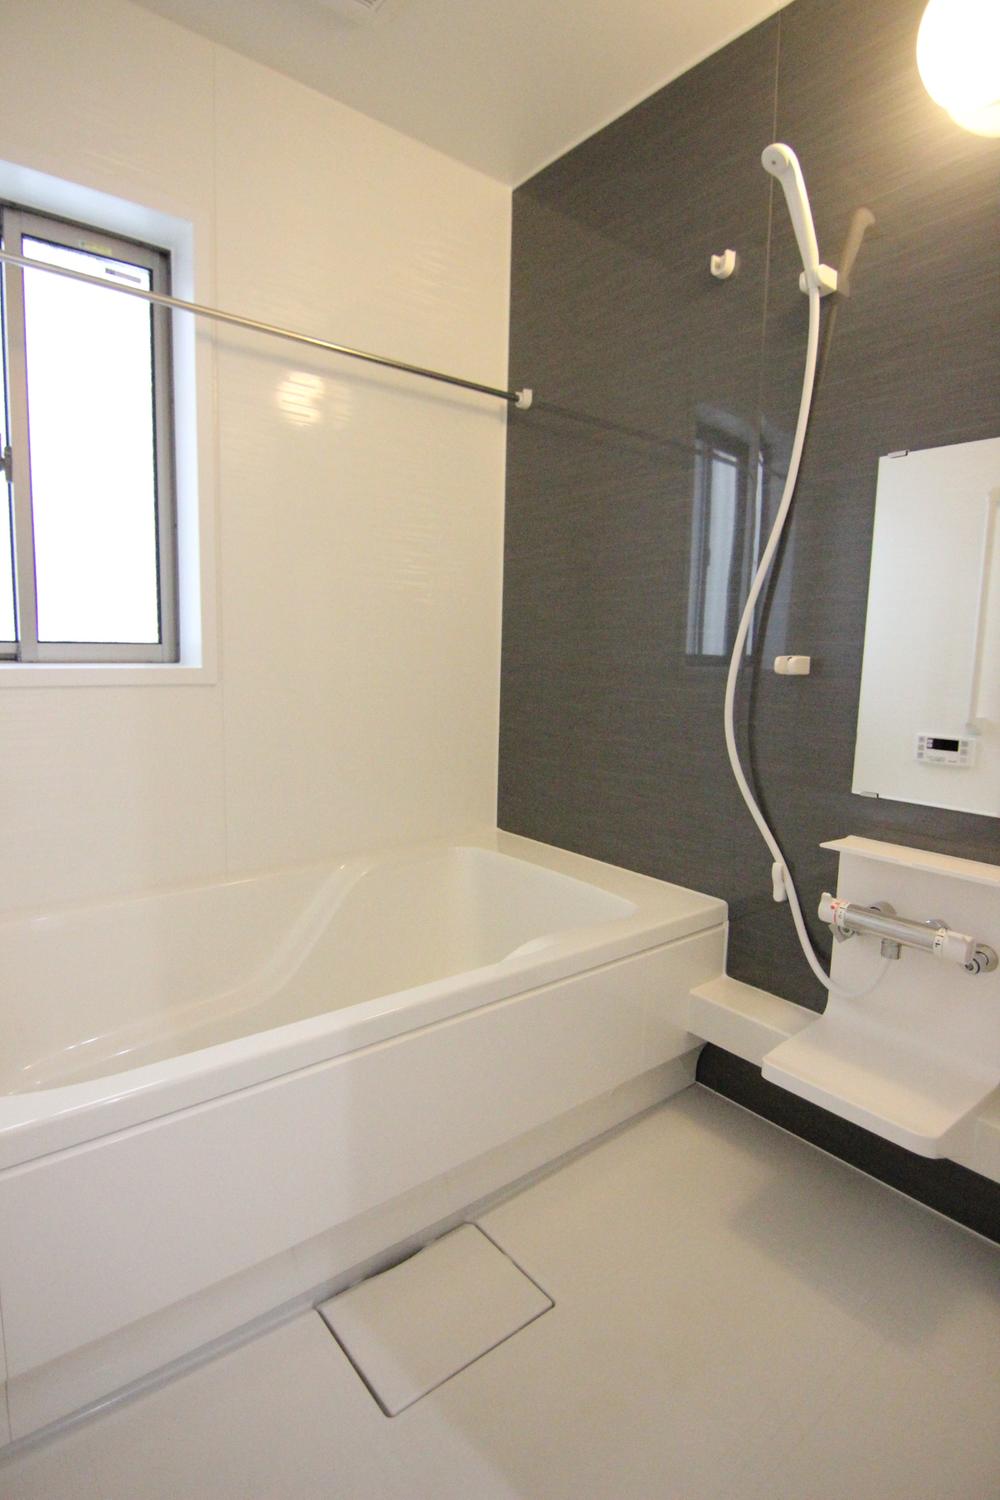 Same specifications photo (bathroom). 27 Building: system bus construction cases ※ With bathroom ventilation dryer